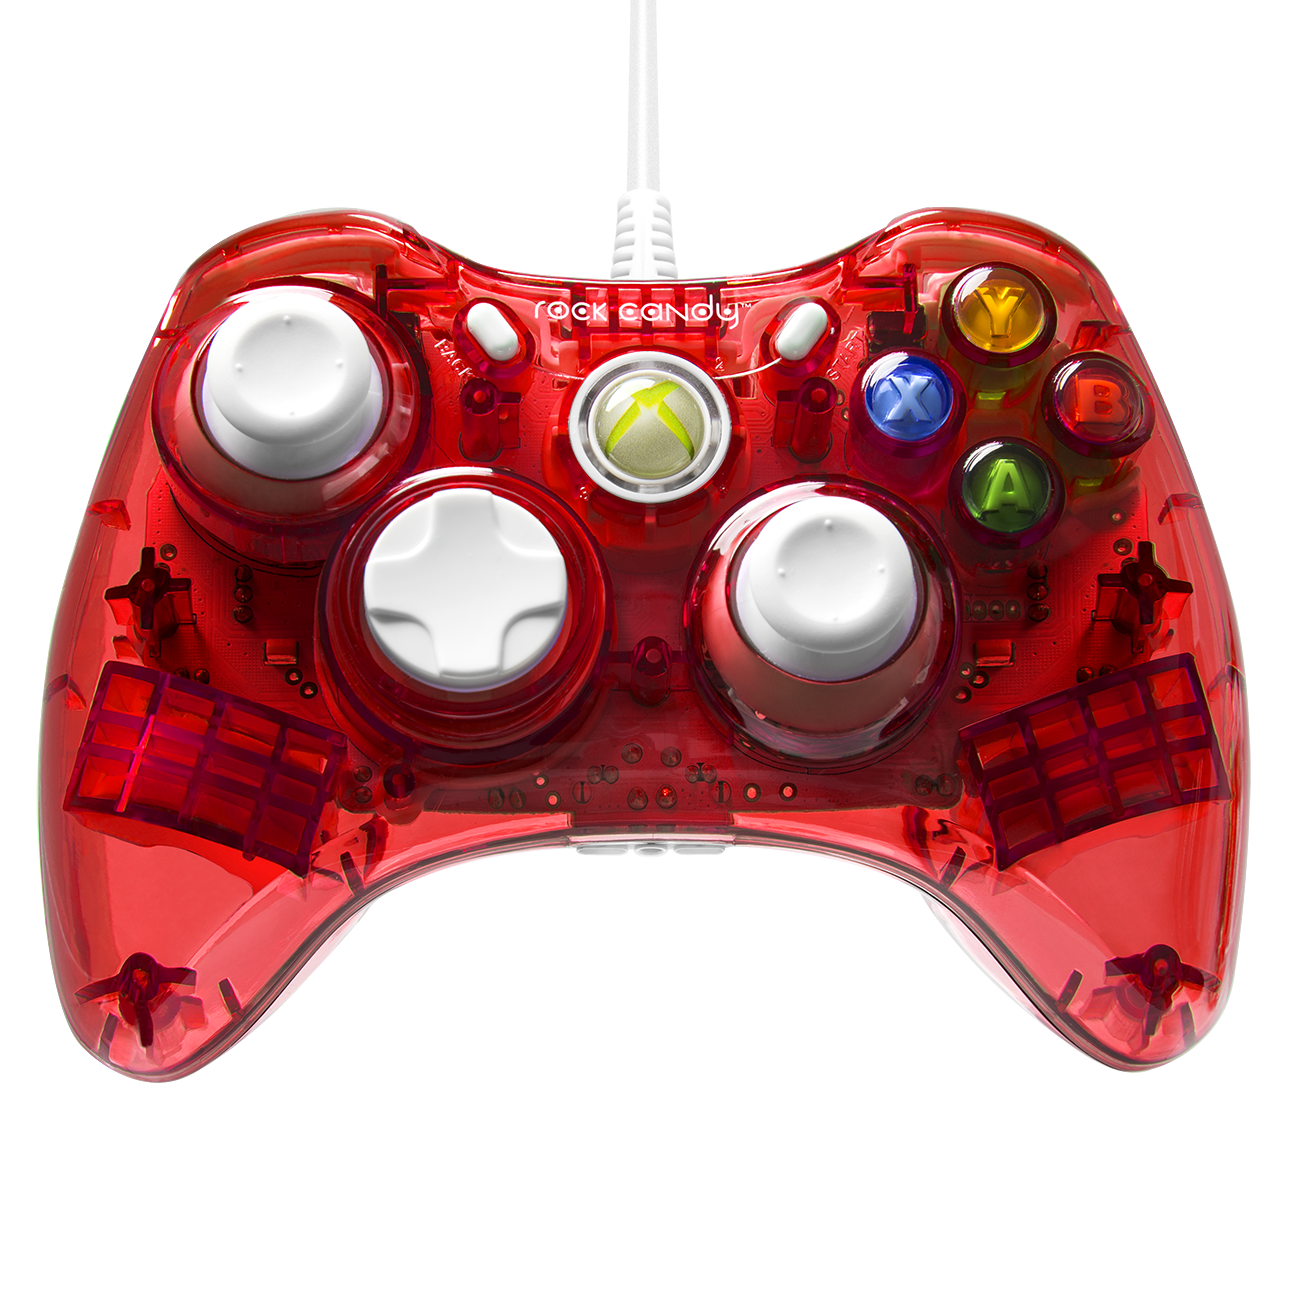 xbox 360 rock candy controller pc windows 10 support